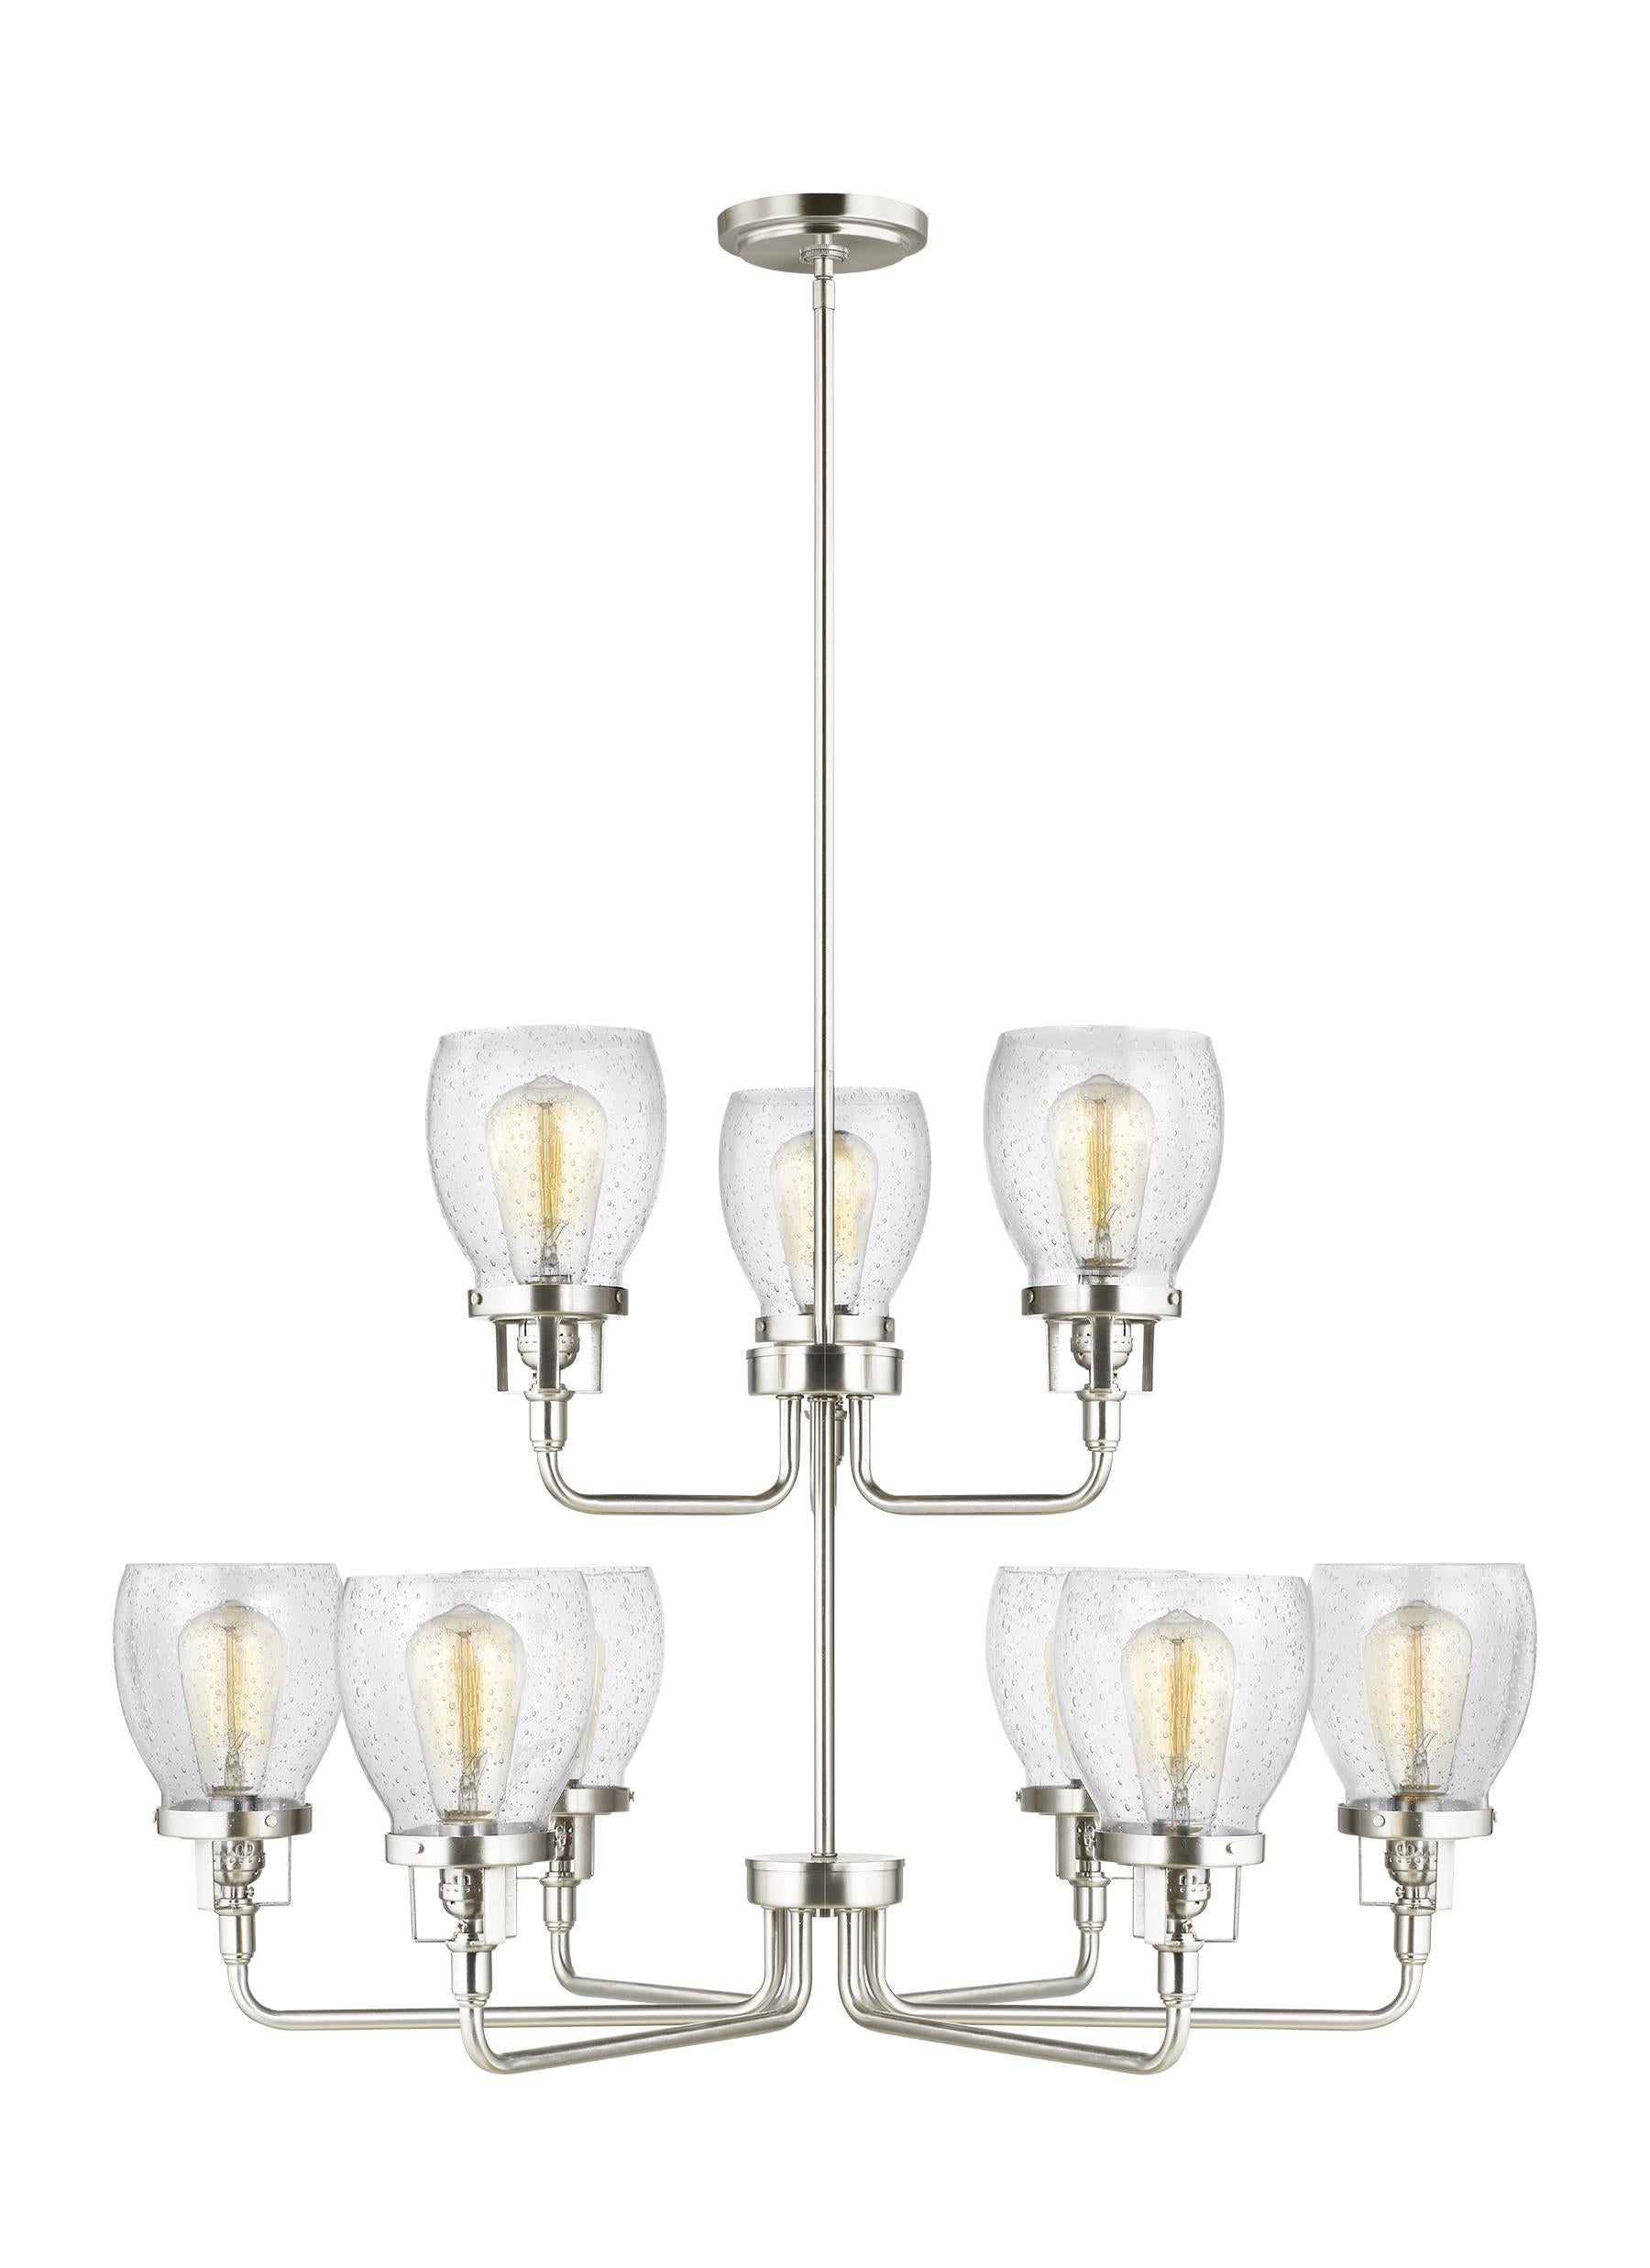 Belton transitional 9-light indoor dimmable ceiling chandelier pendant light in brushed nickel silver finish with clear se...